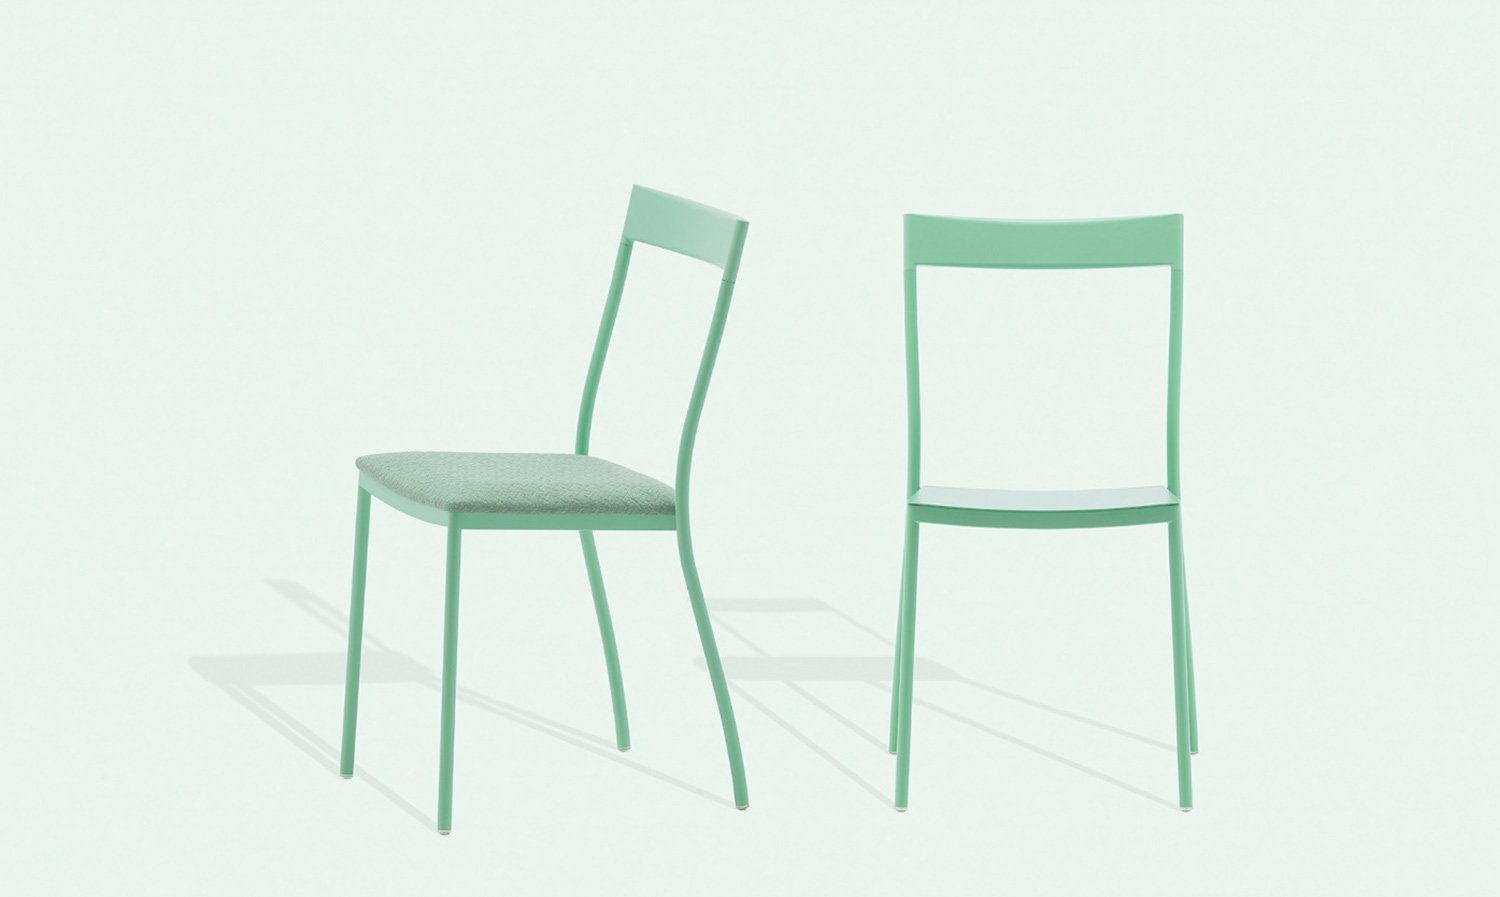 Two beautiful green color chairs on a white background